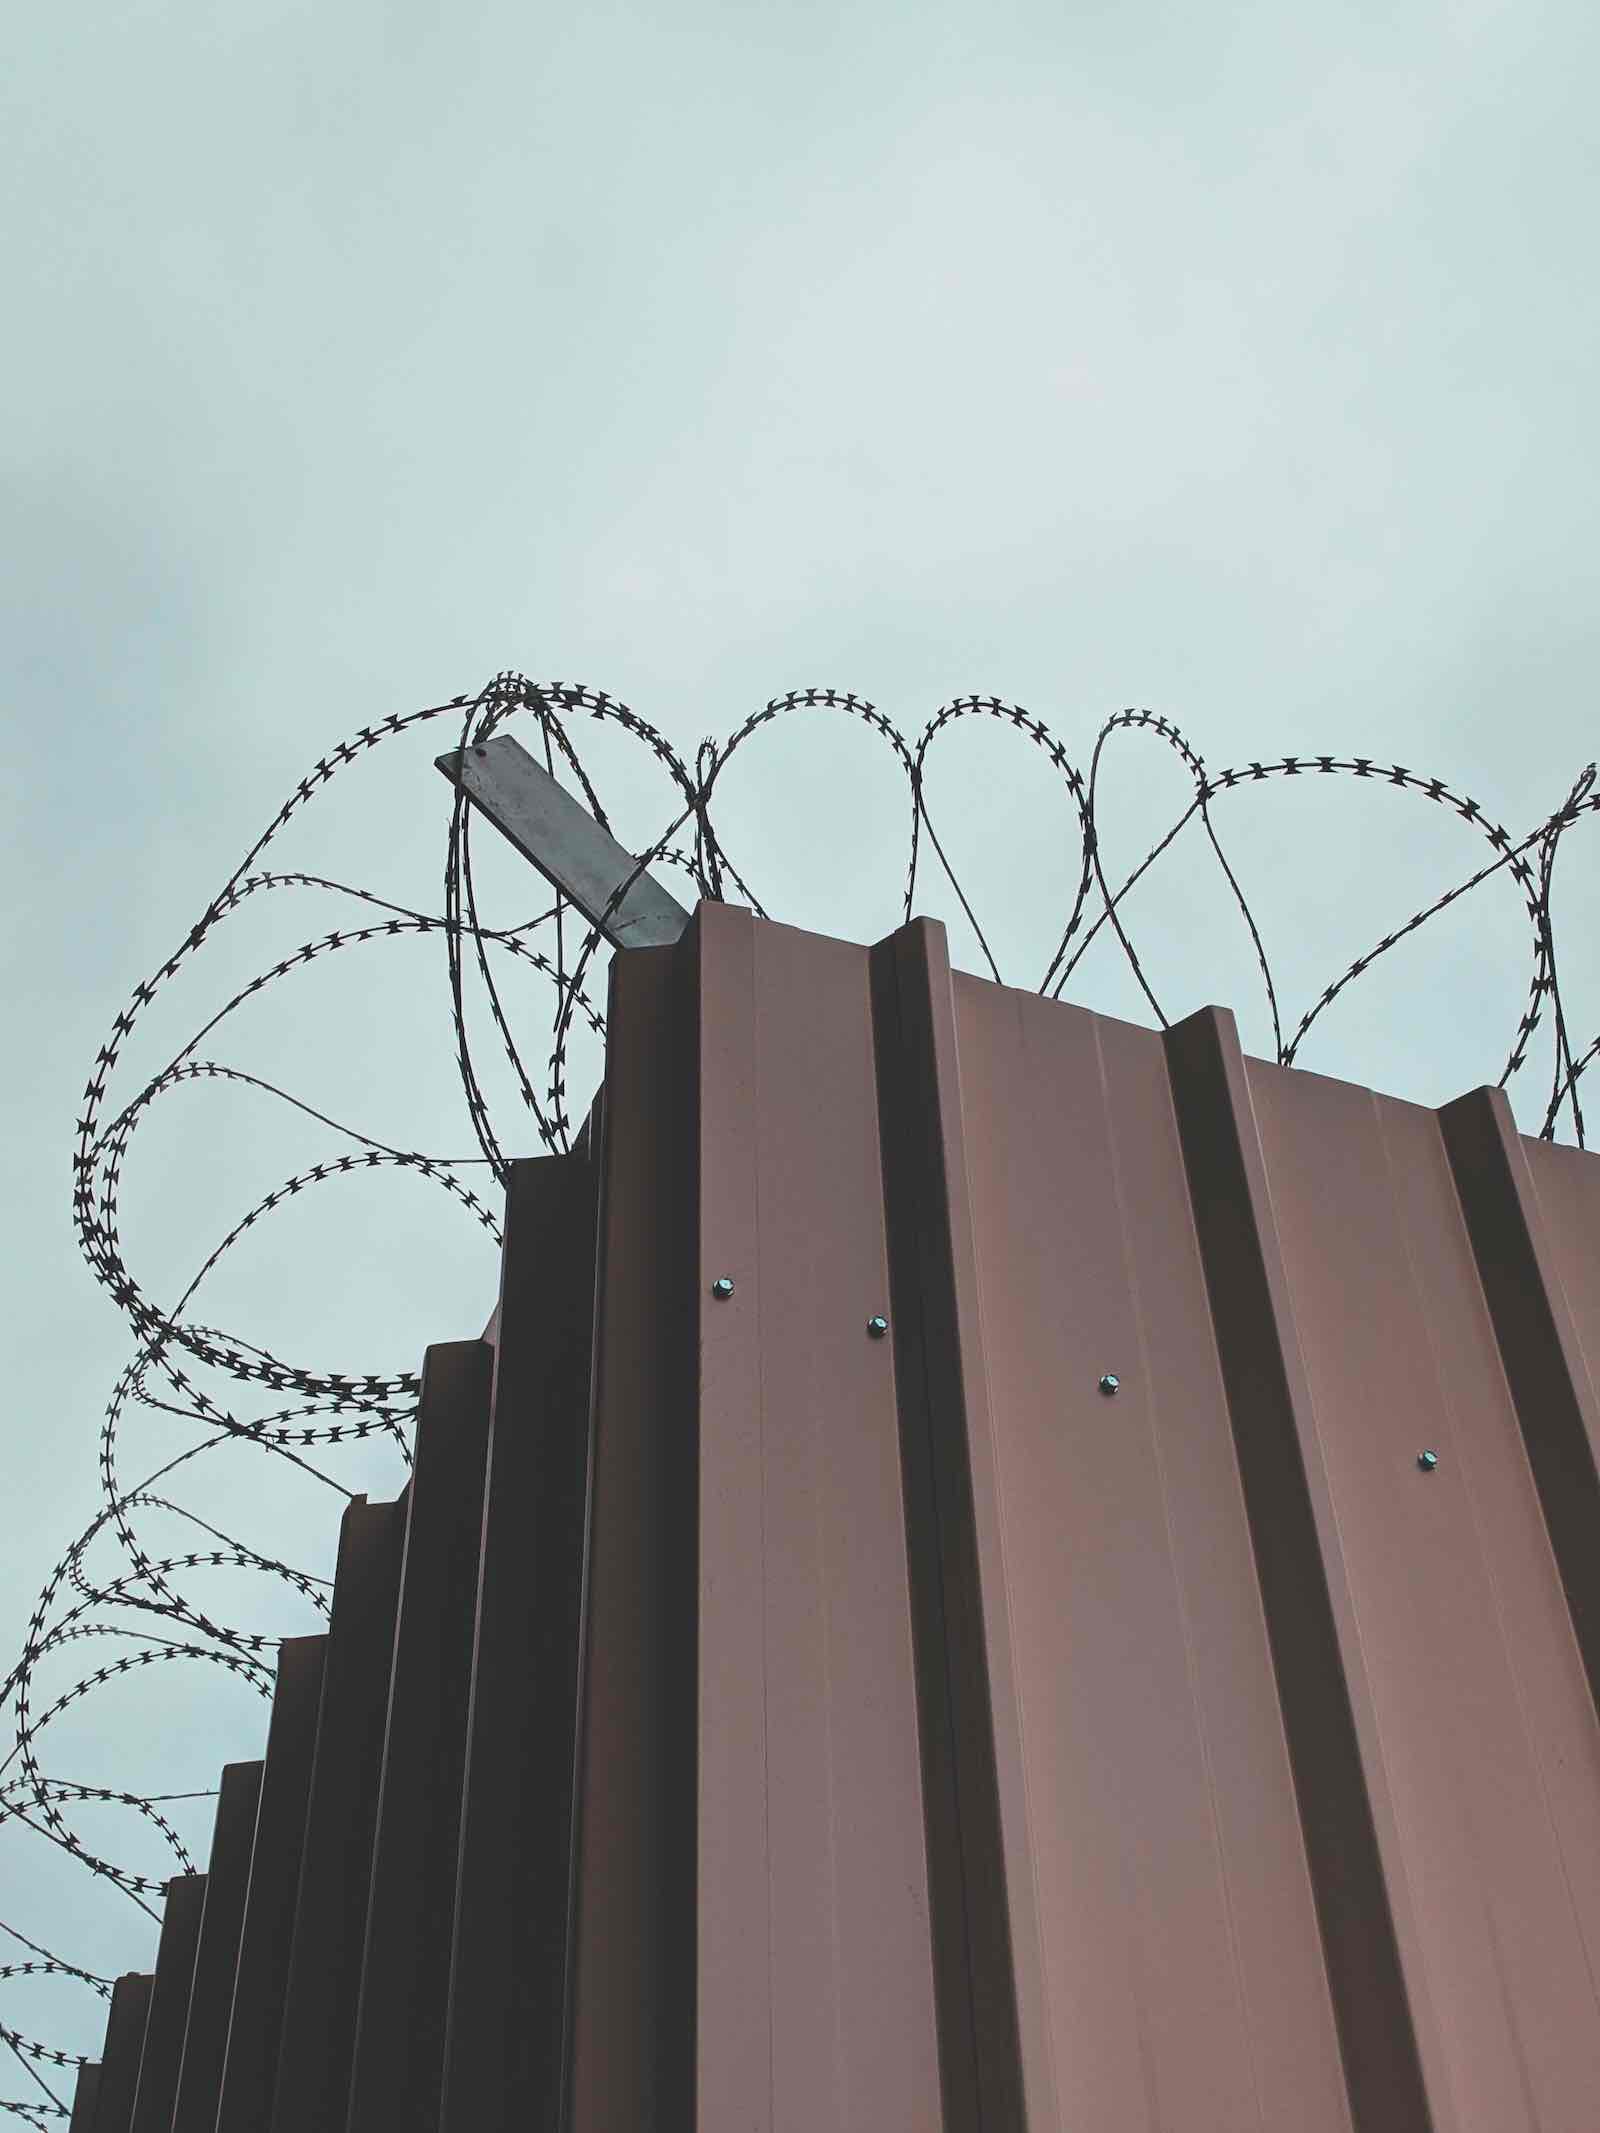 Image of barbed wire above a metal wall